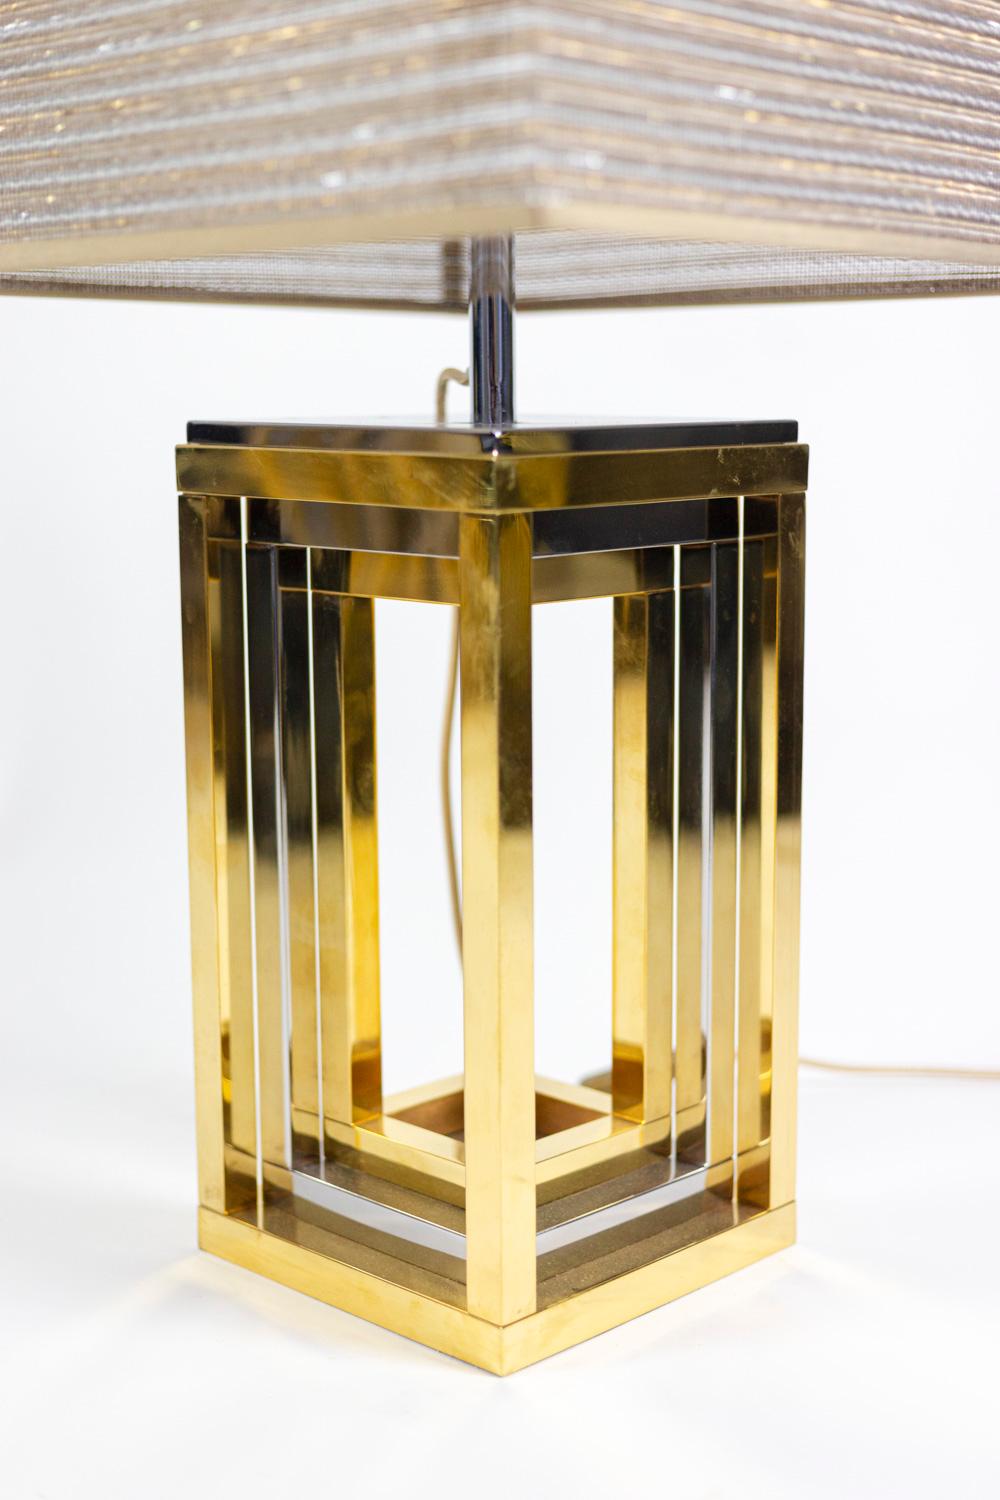 Romeo Rega, signed.
Pair of square and openwork lamps in chromed and gilt metal.

Work realized in the 1970s.

New and functional electrical system.

The price doesn’t include the lampshade price. However, our workshop can advise you with